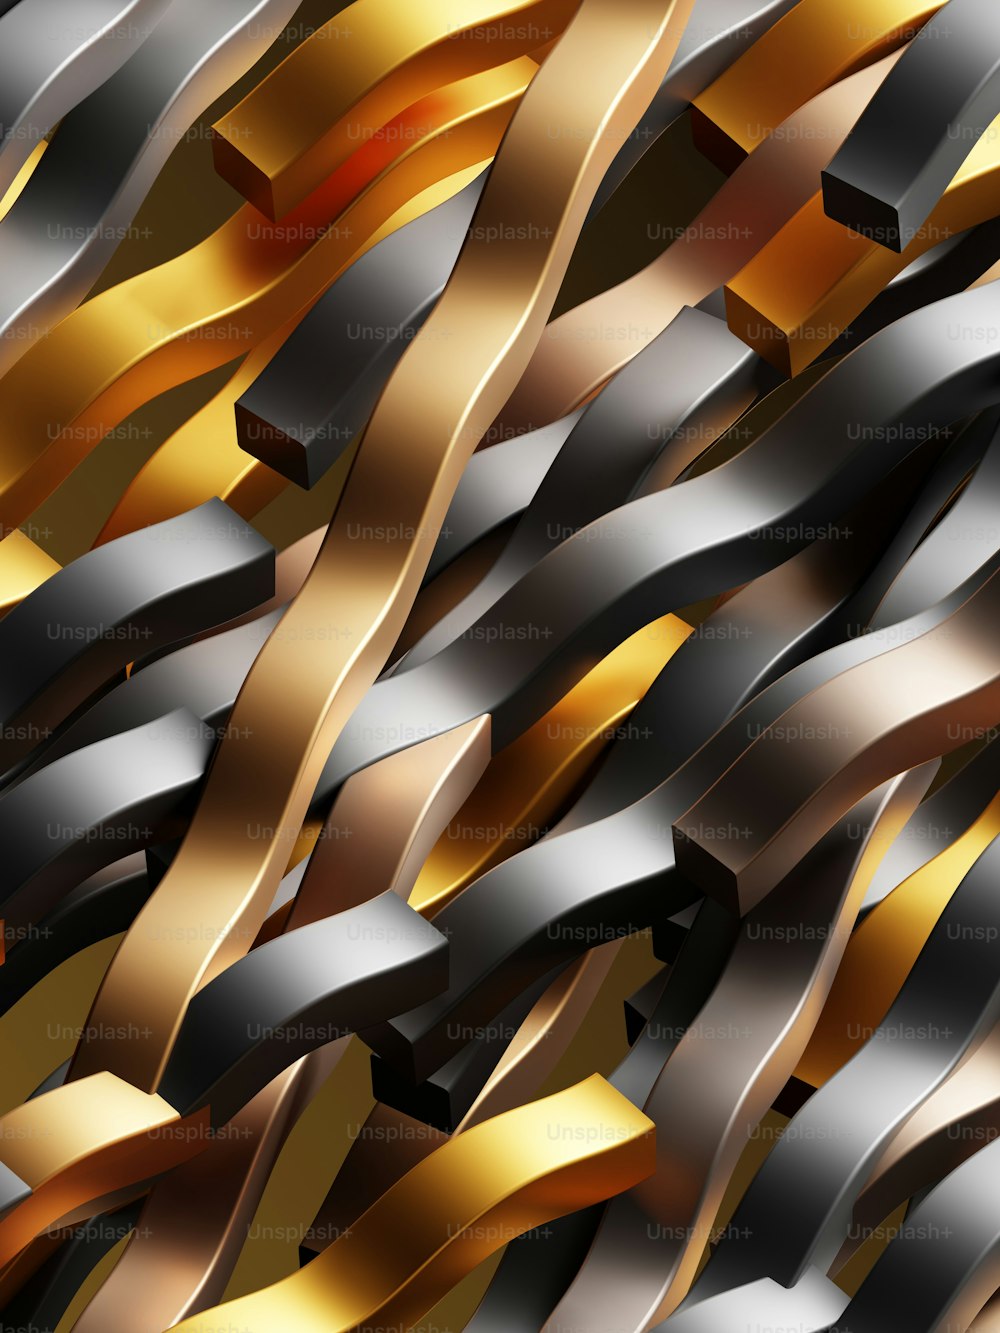 a bunch of metallic objects that are stacked together